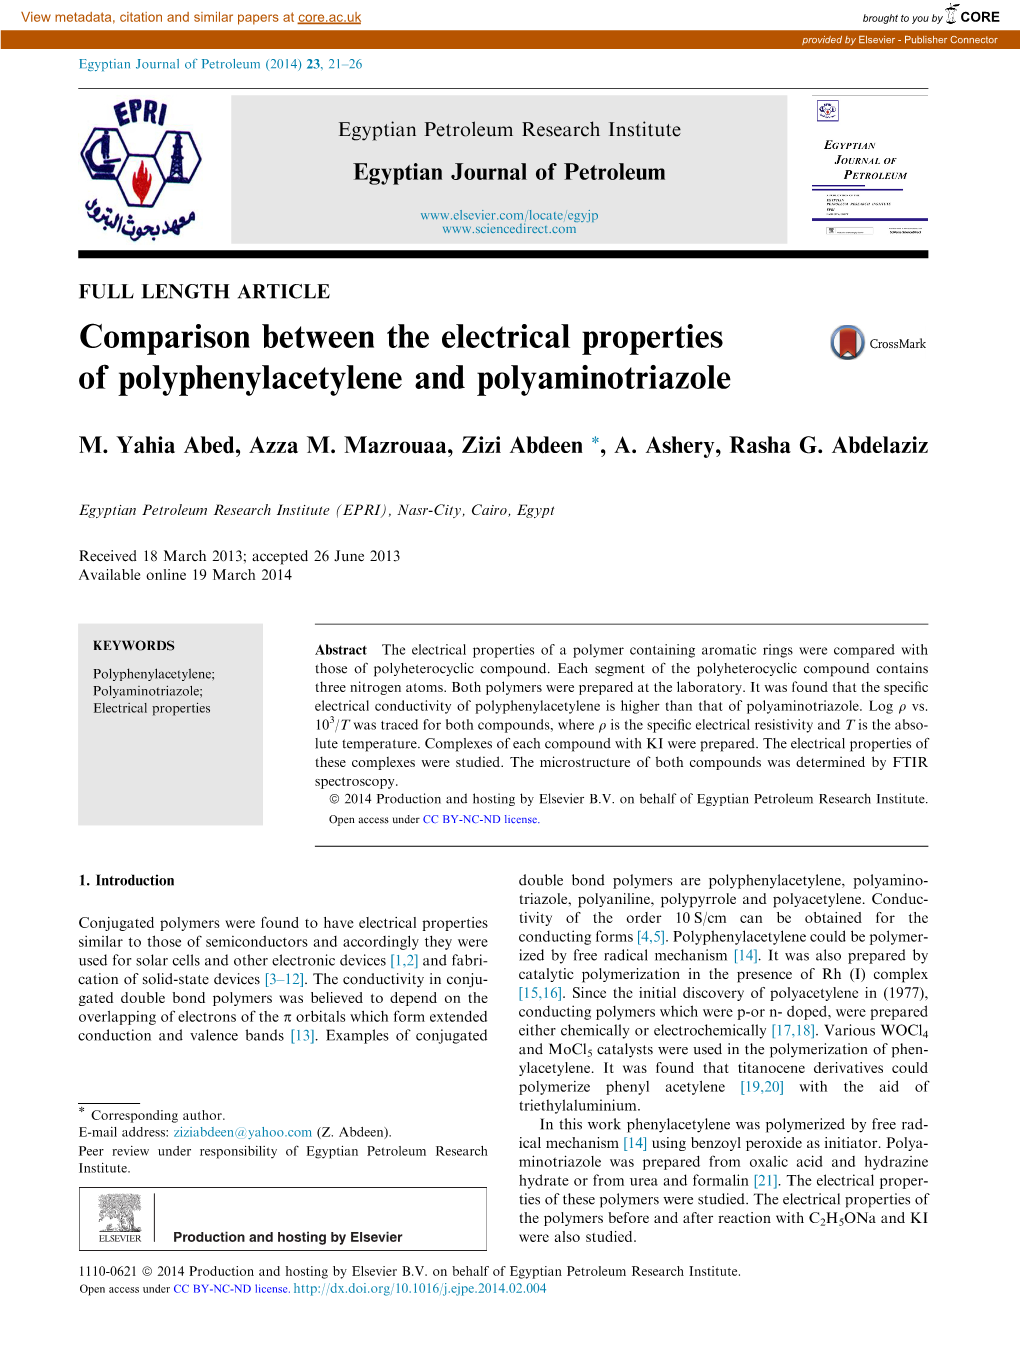 Comparison Between the Electrical Properties of Polyphenylacetylene and Polyaminotriazole